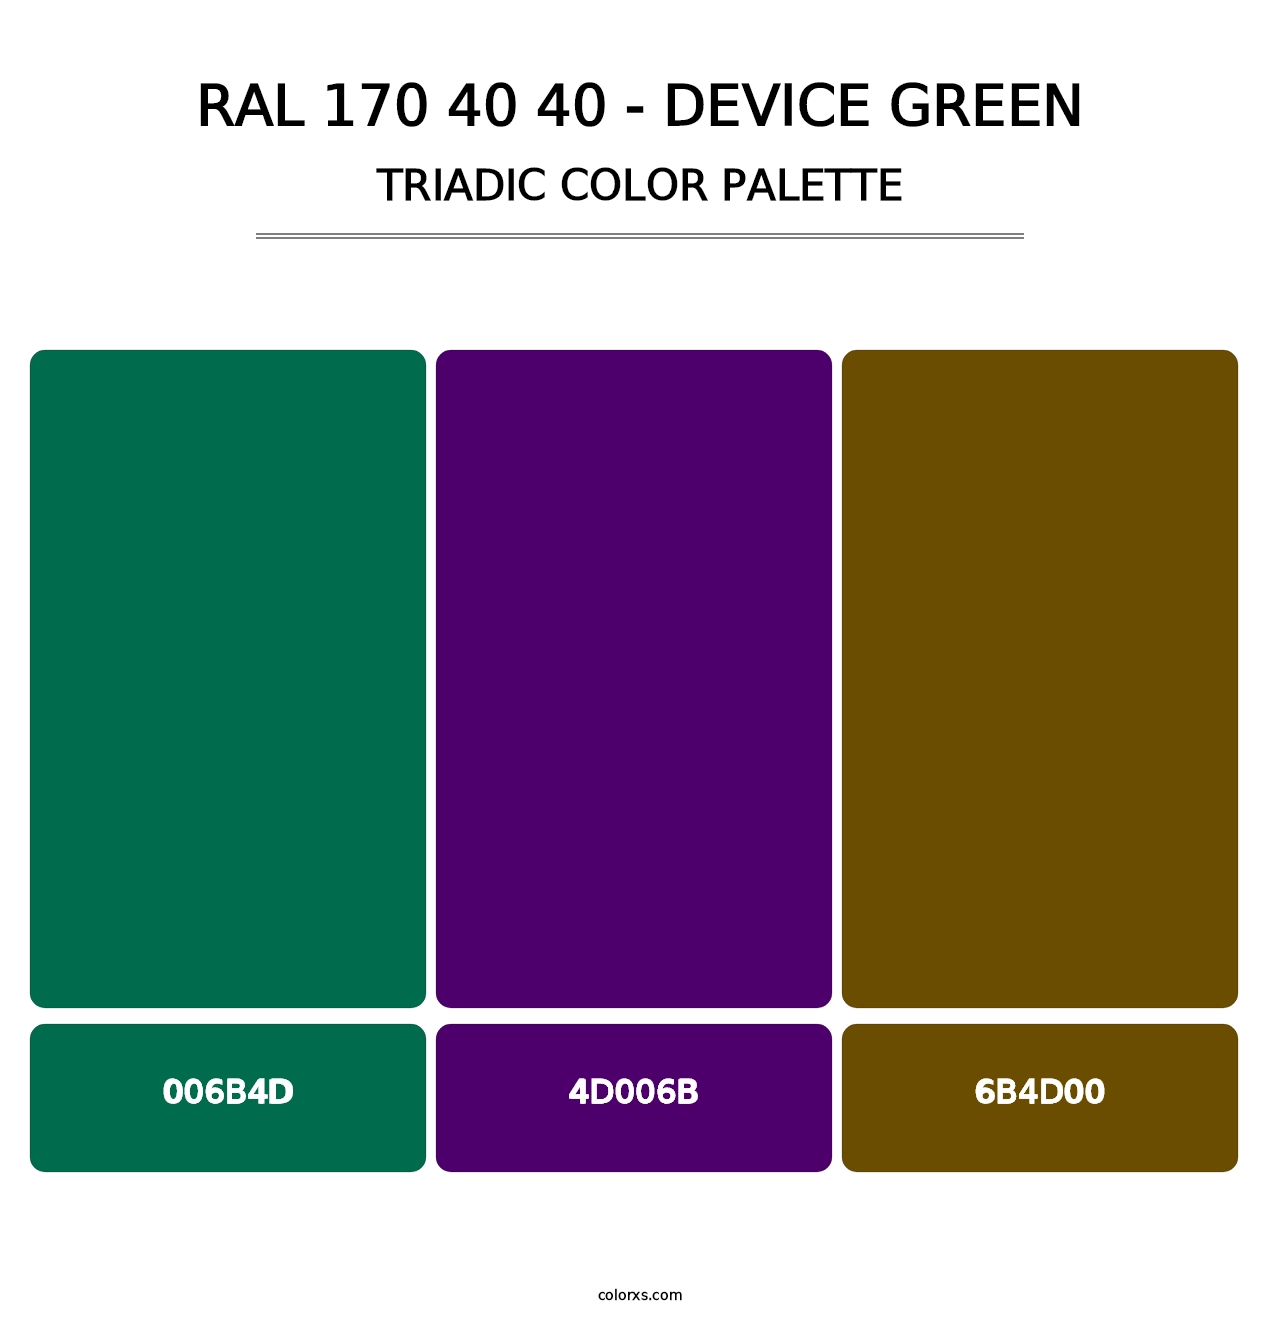 RAL 170 40 40 - Device Green - Triadic Color Palette